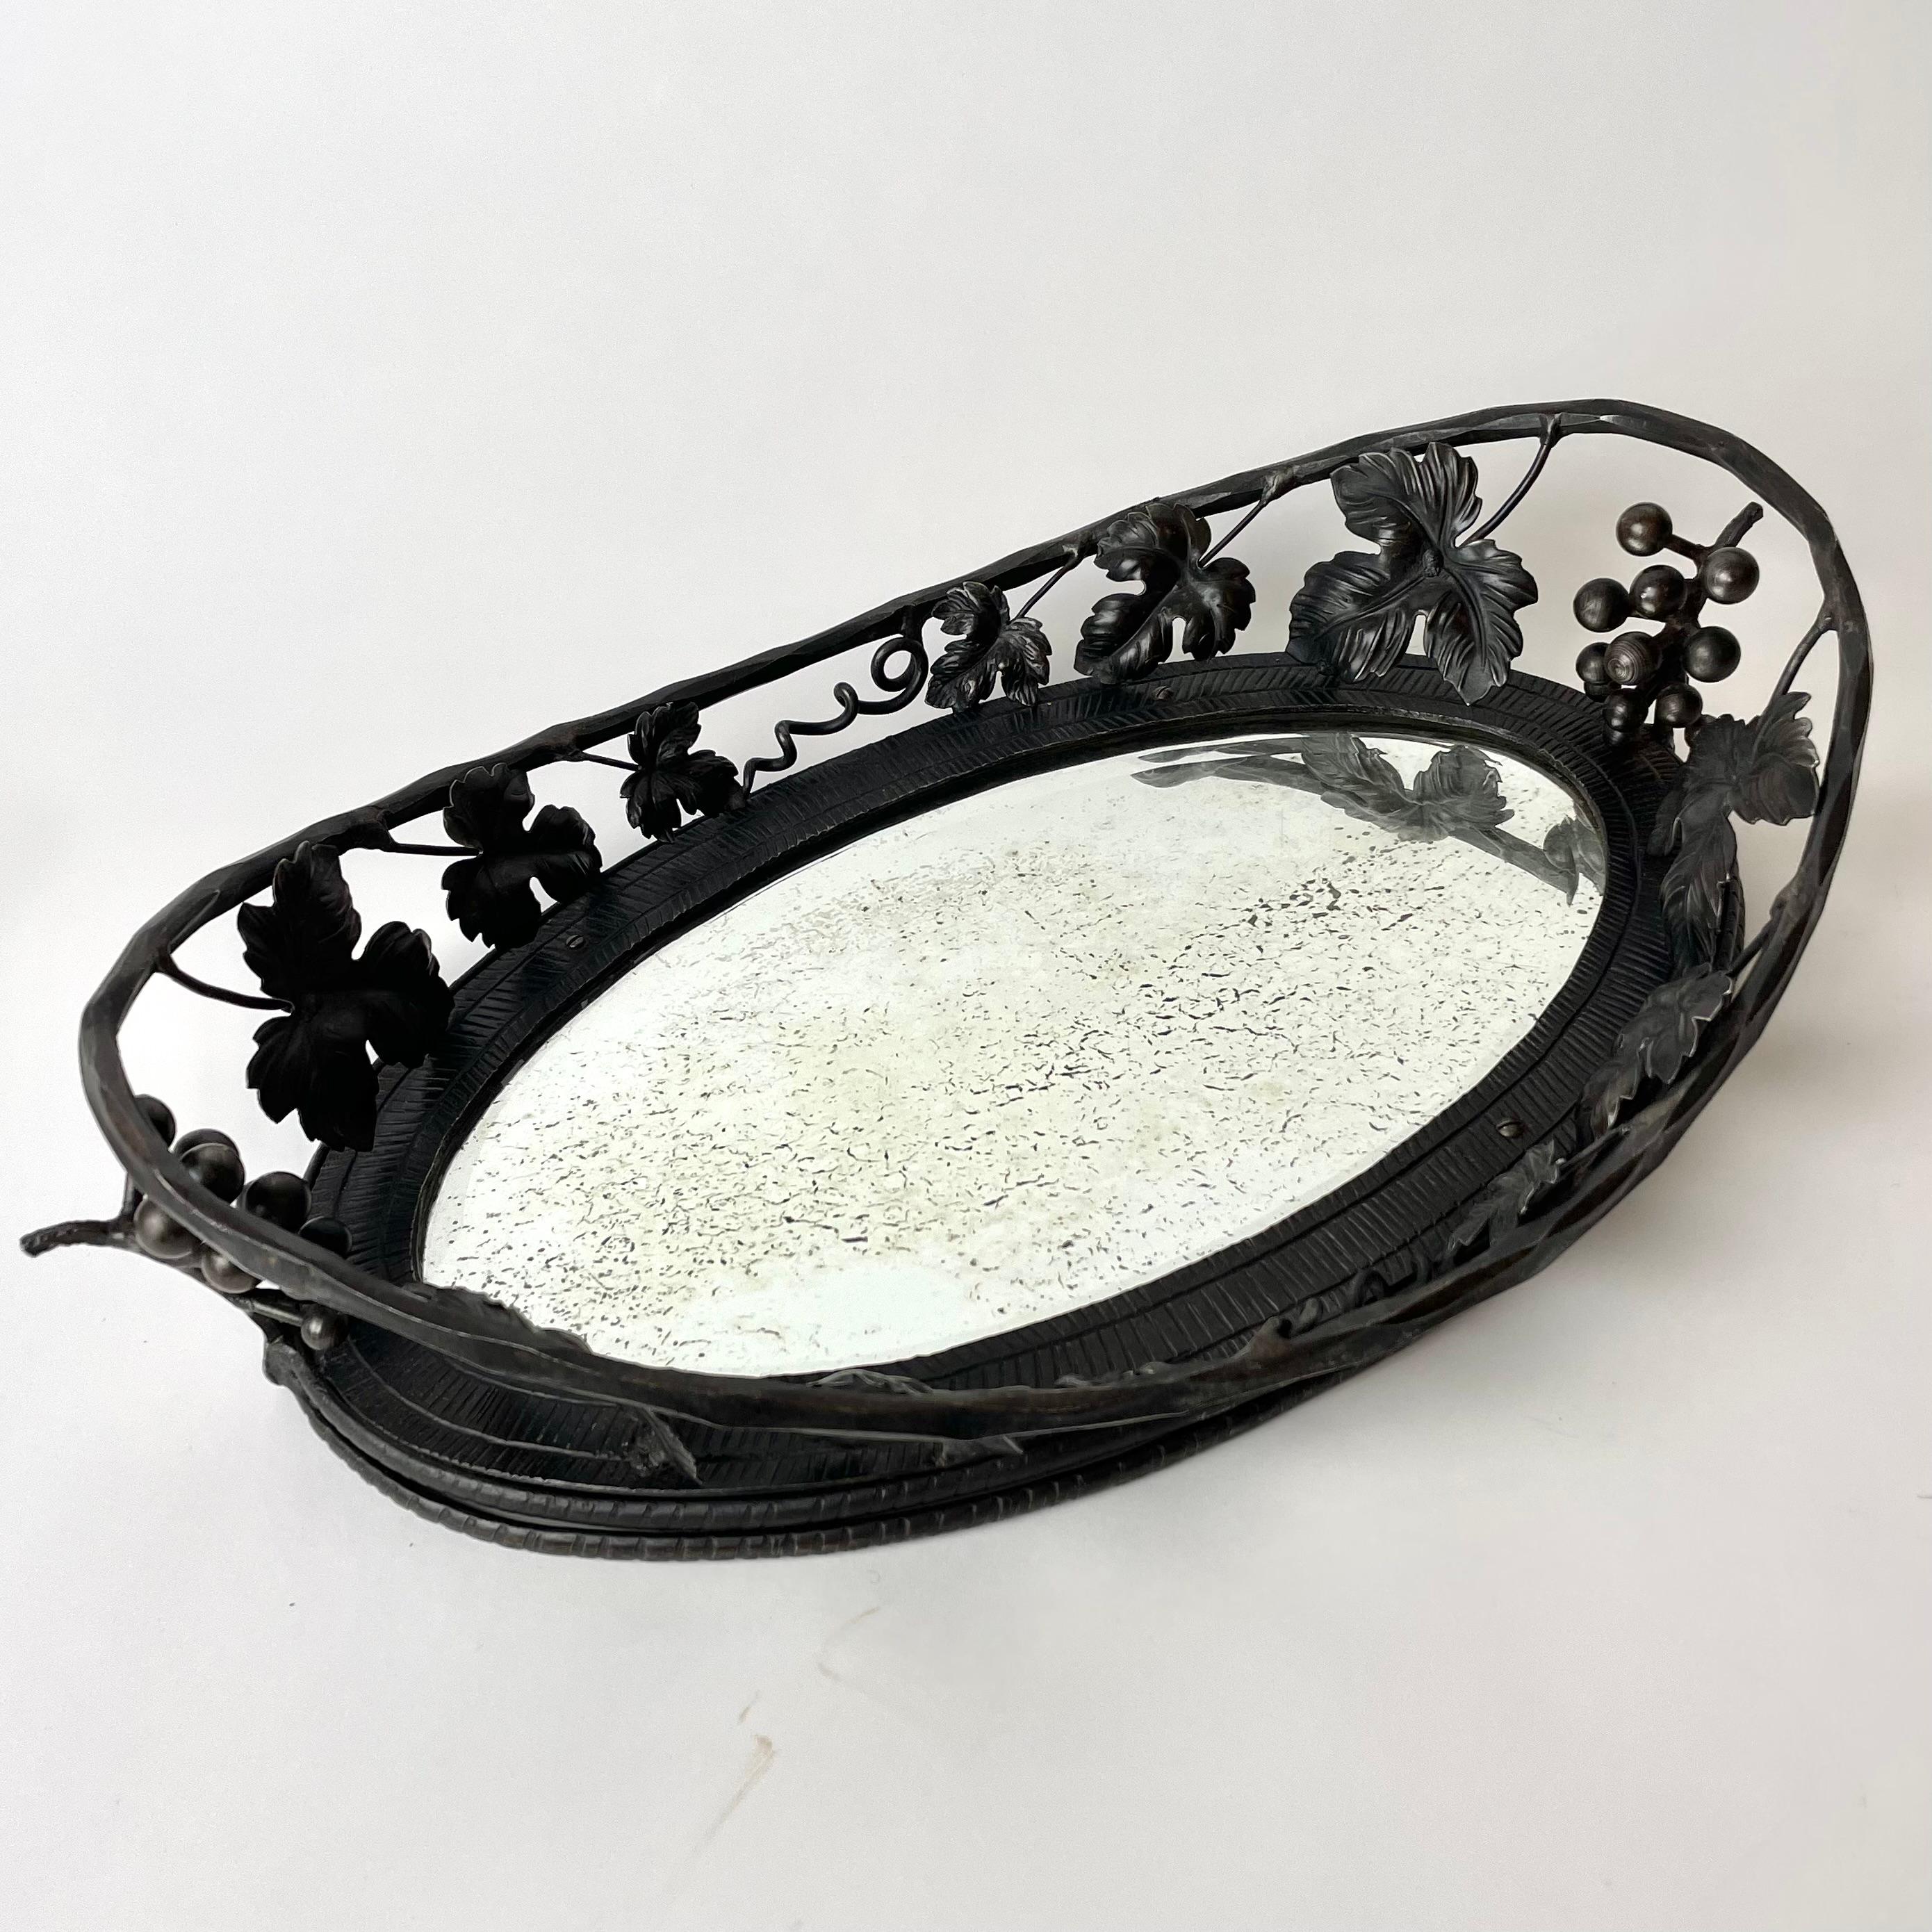 European Beautifully Decorated Fruit Bowl in Wrought Iron from the, 1920s